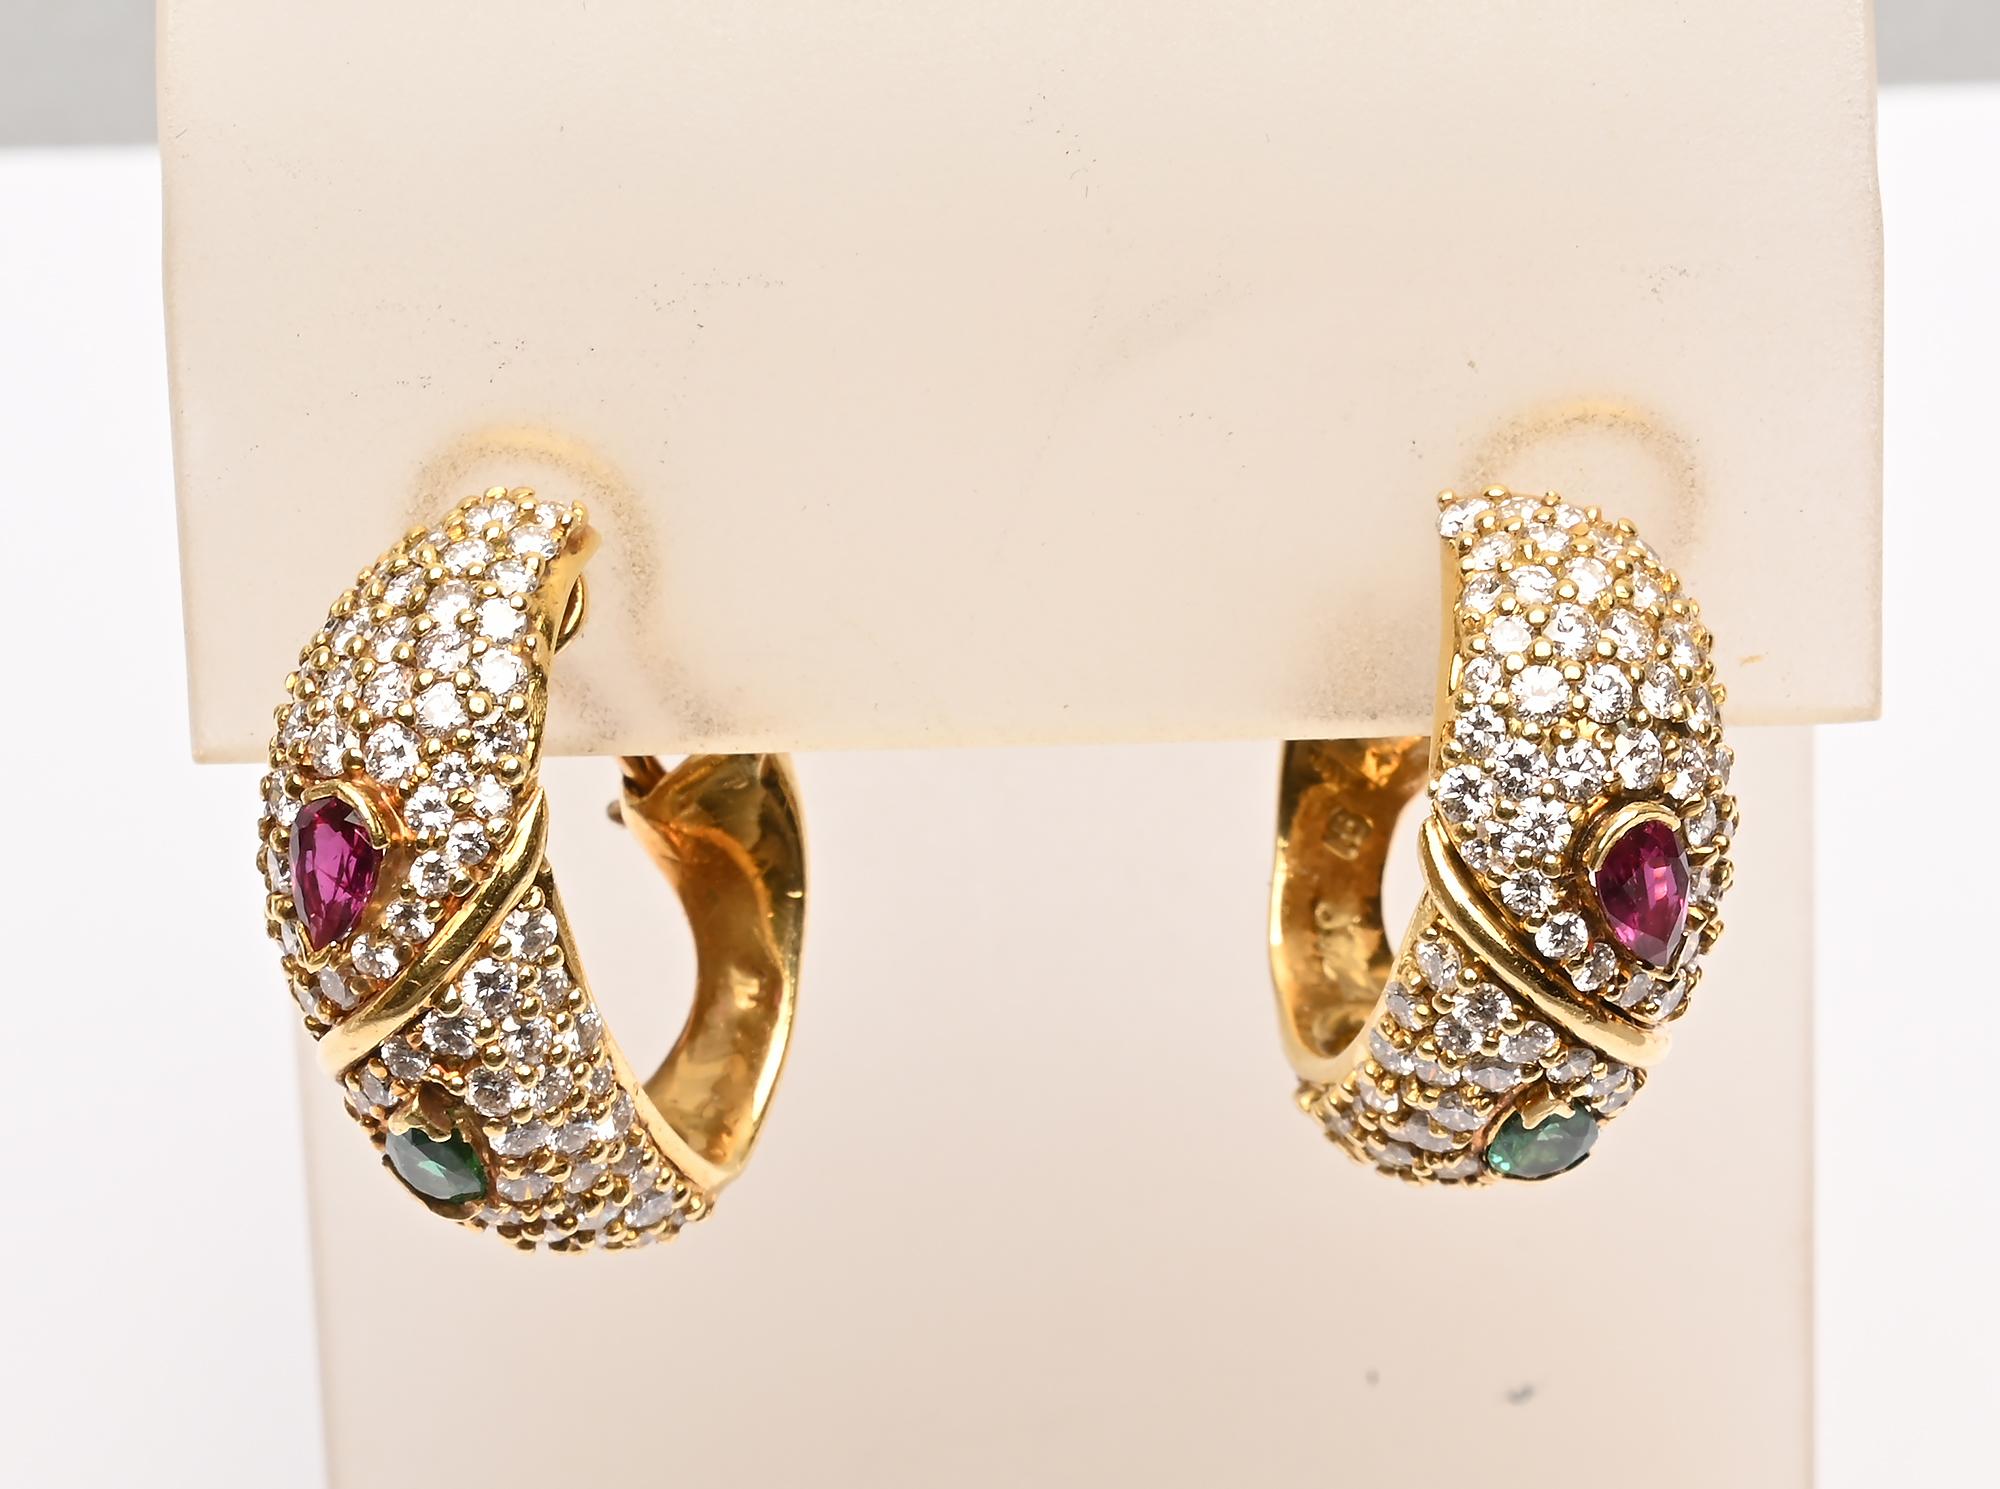 Contemporary Hammerman Brothers Diamond Hoop Earrings with Rubies and Emeralds For Sale